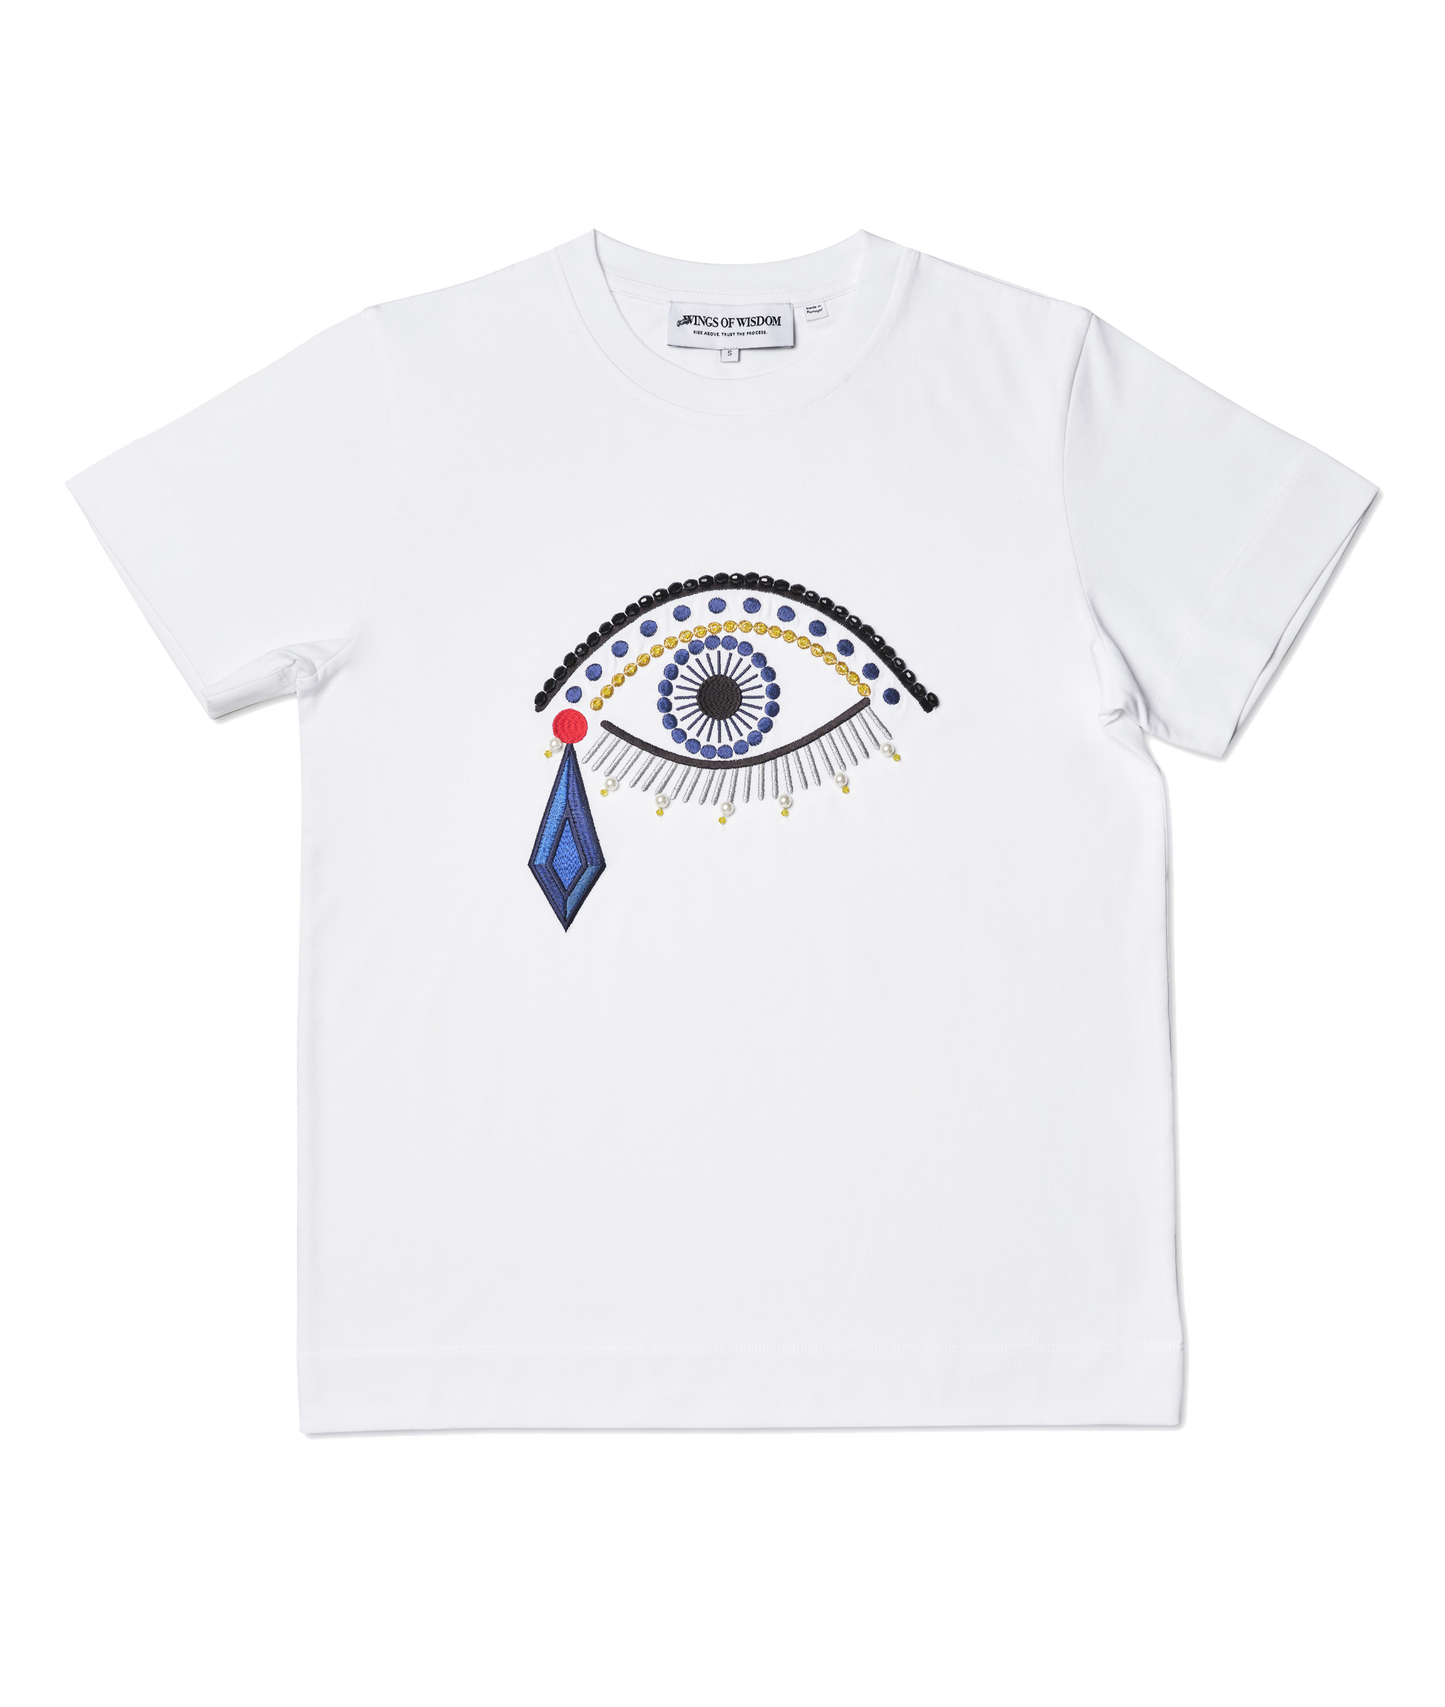 ‘Providence Made Me Cry’ White T-Shirt Women